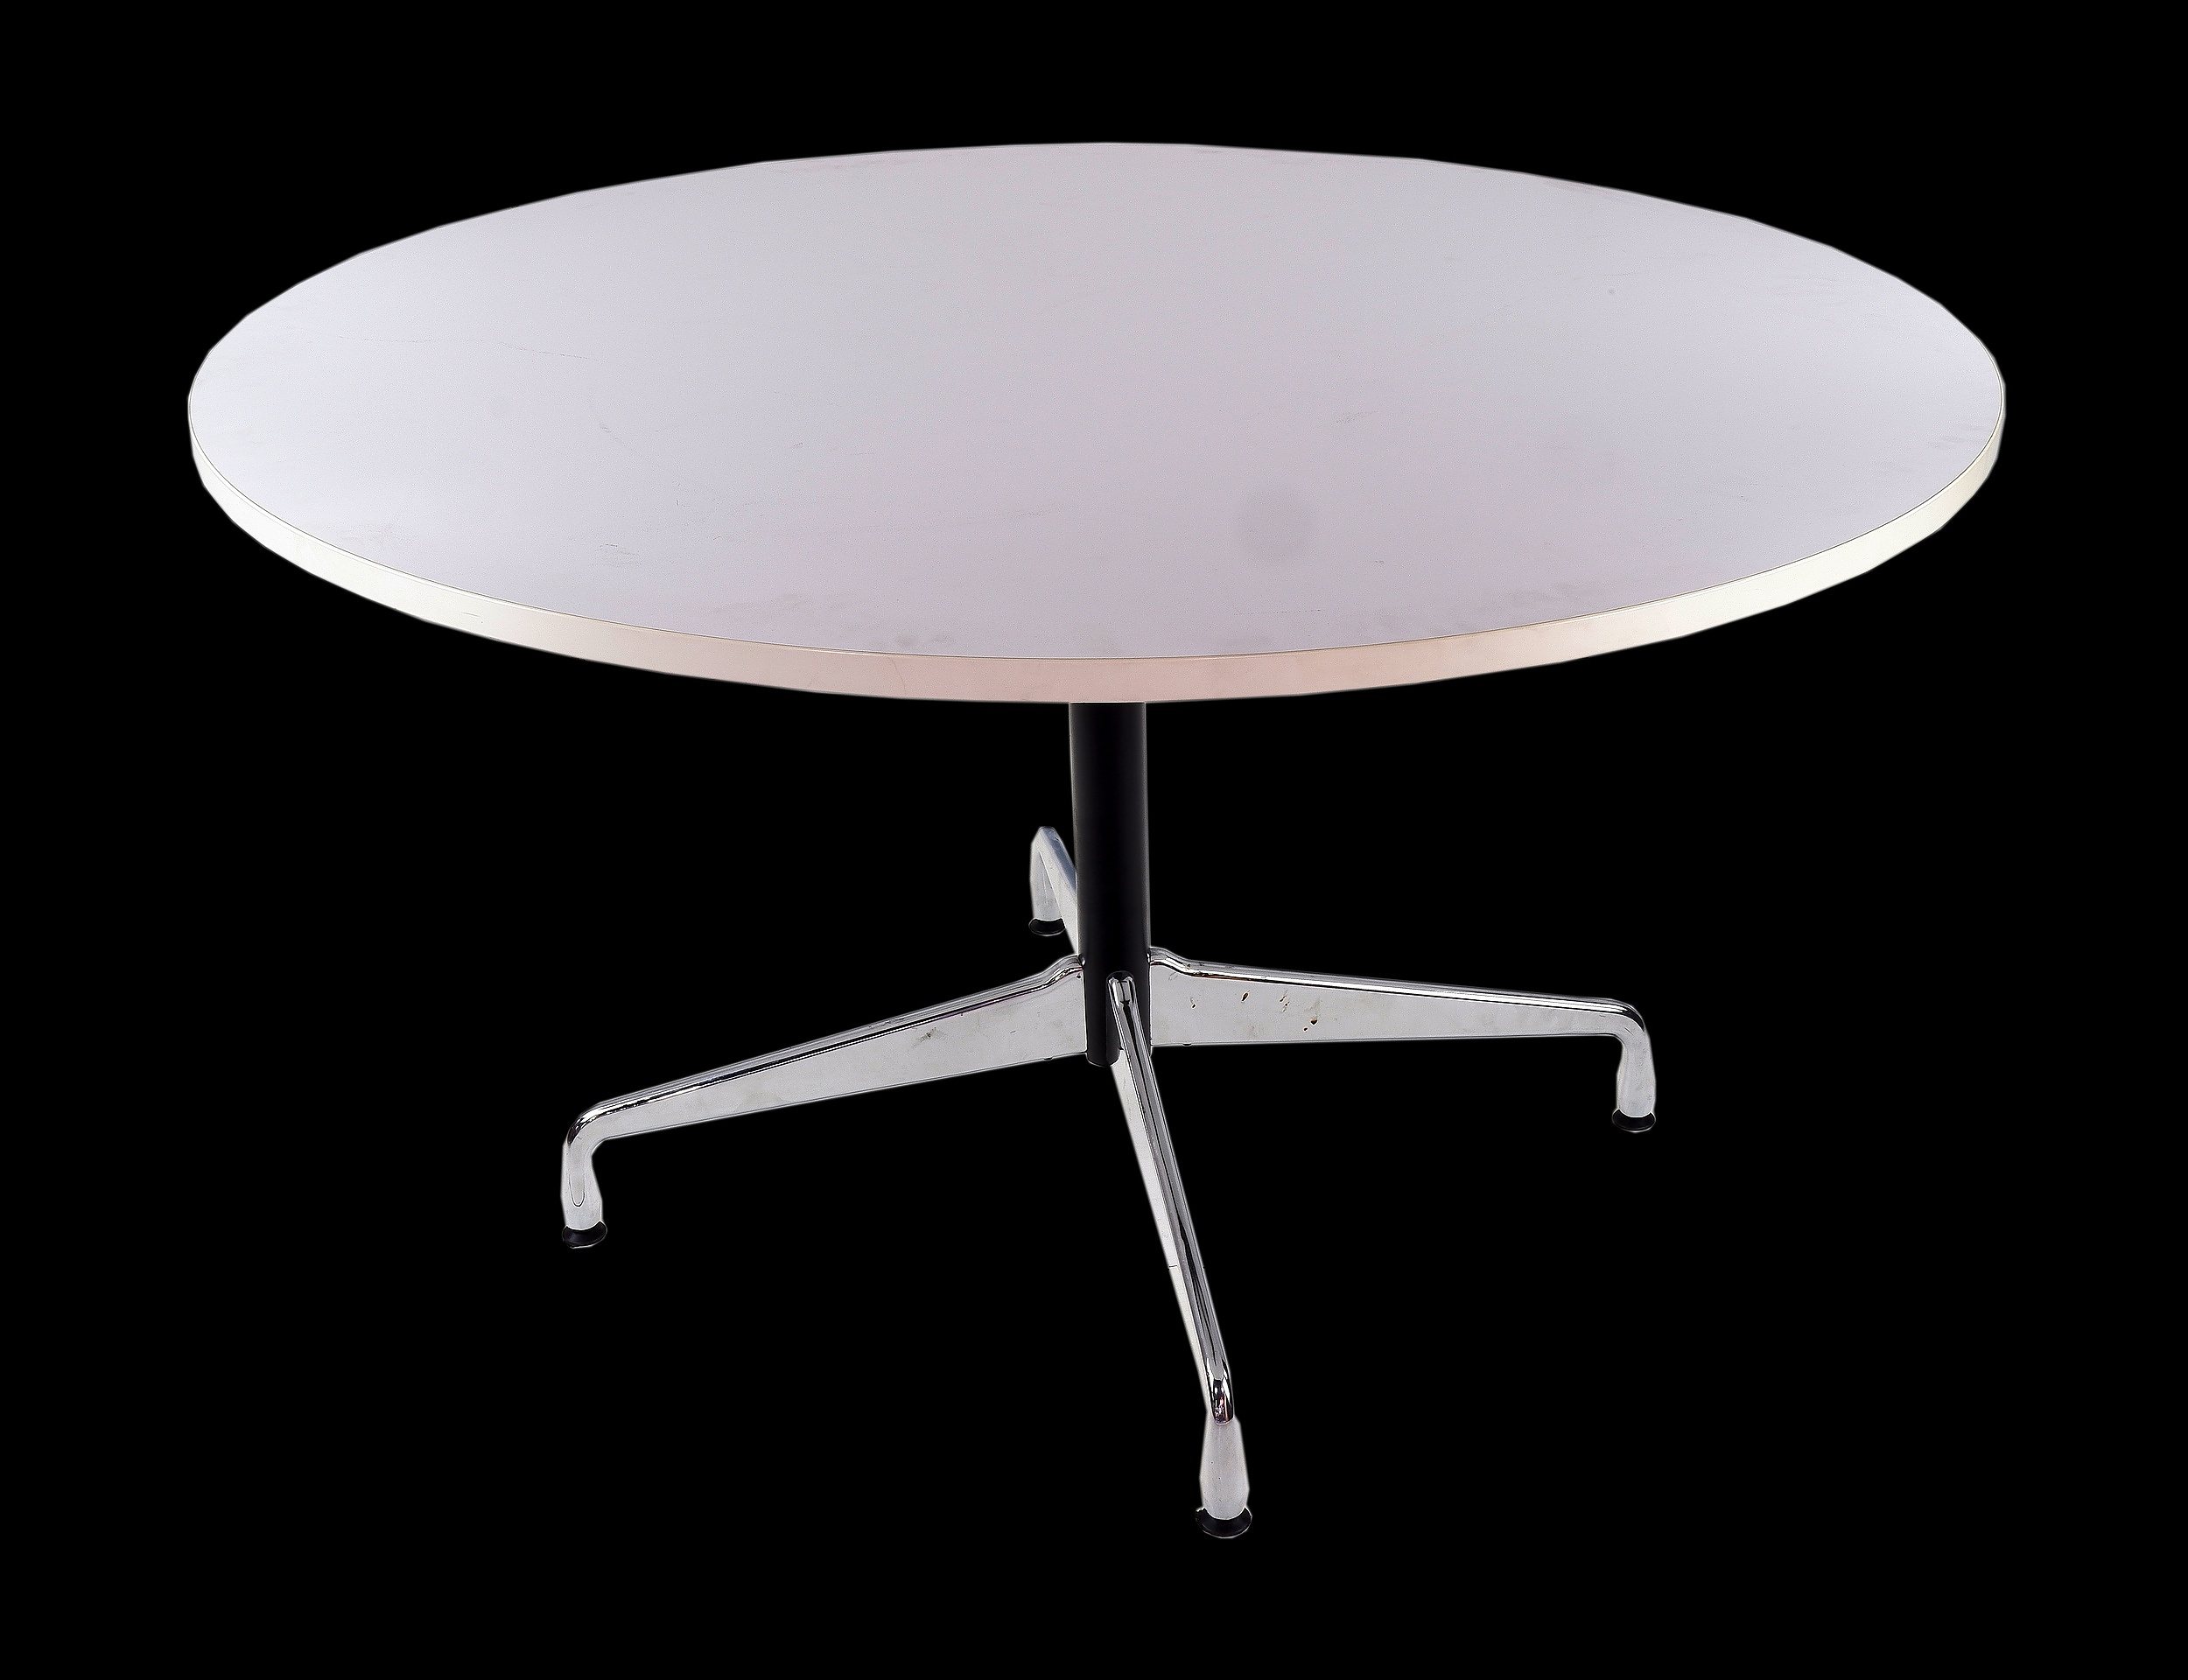 'Eames Style Circular Dining Table'